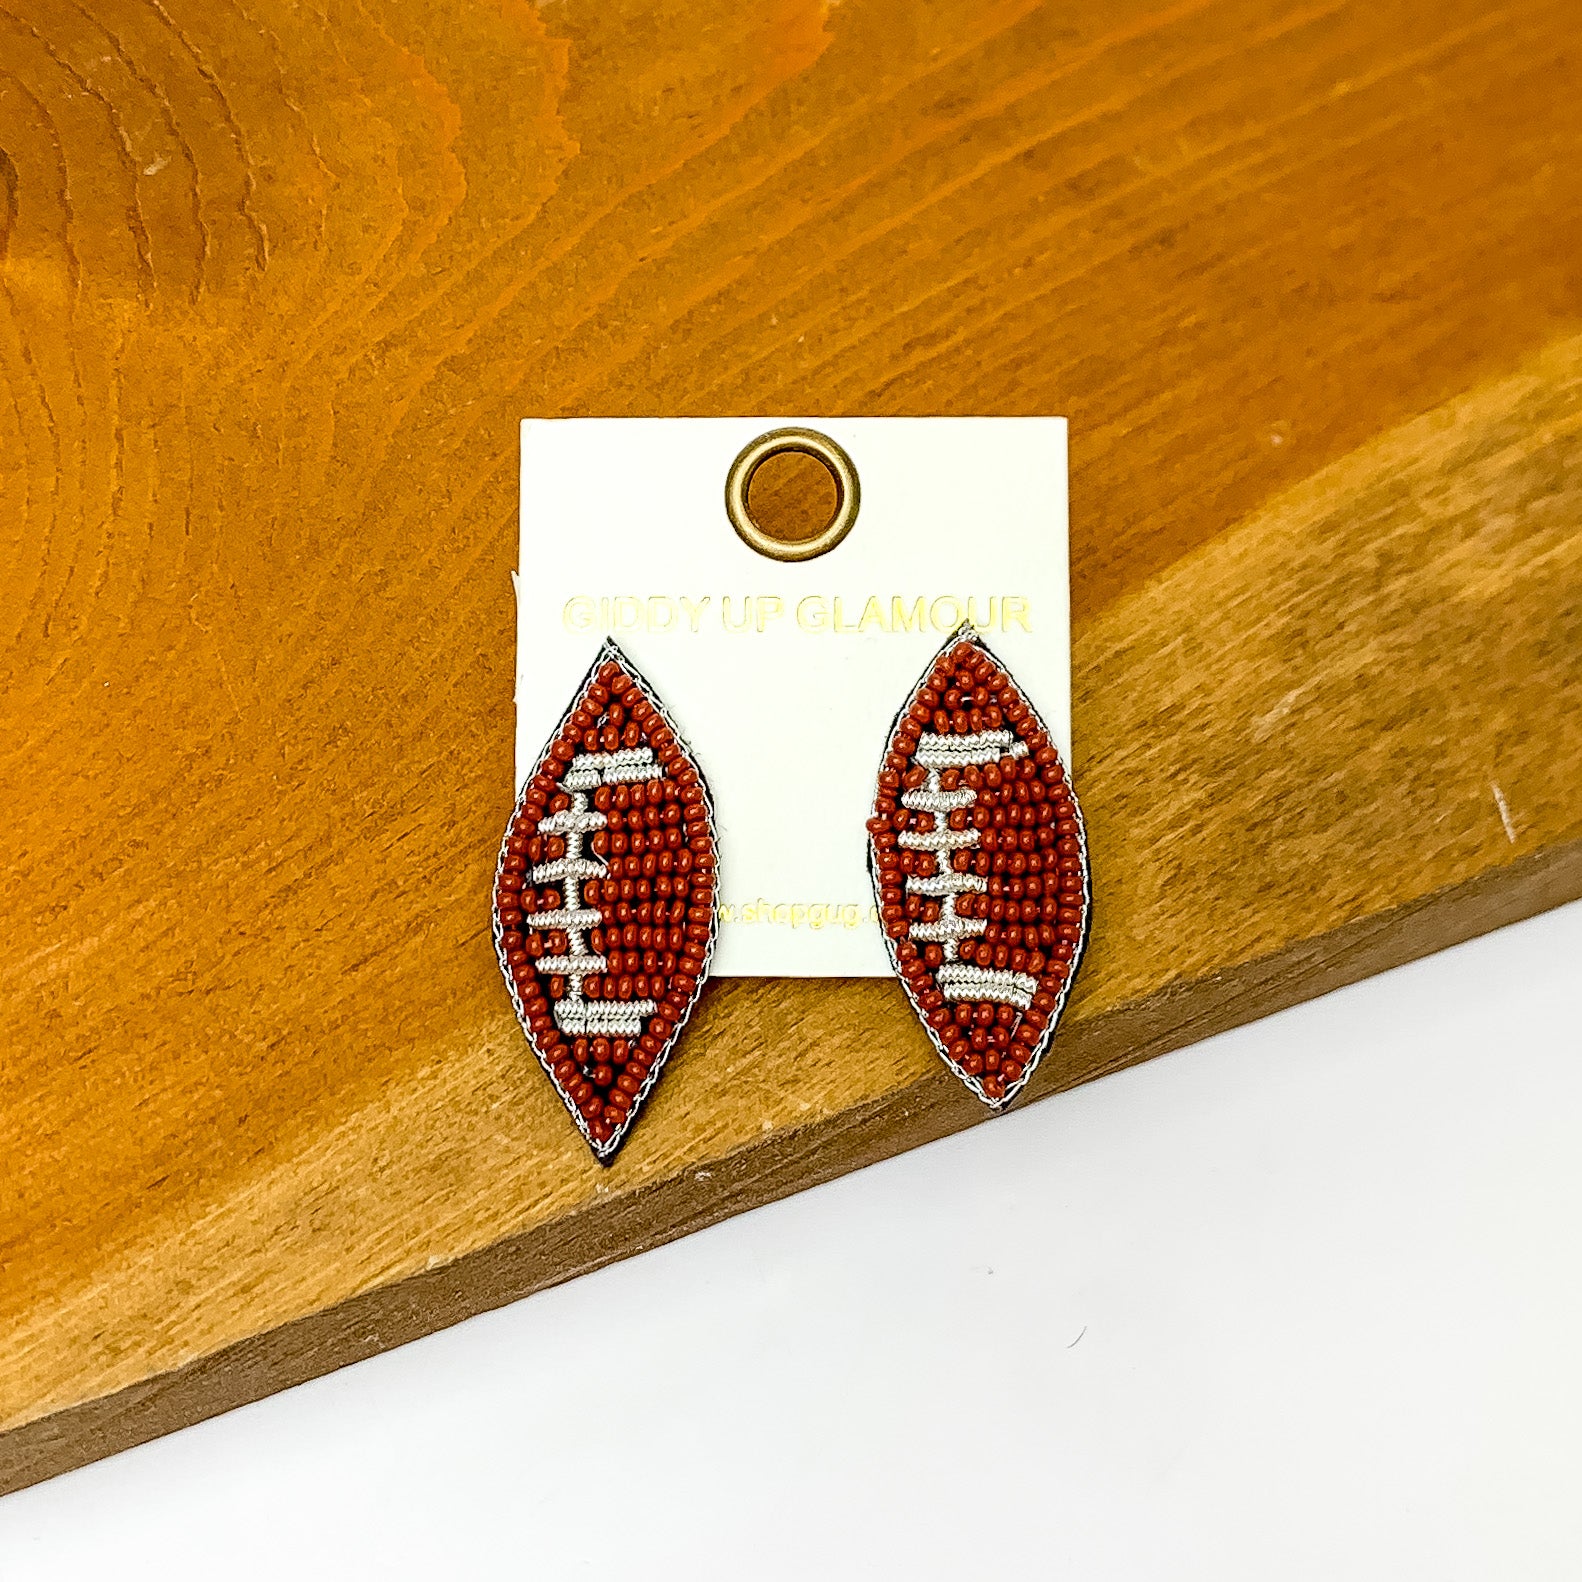 Let's Get Sporty Seed Bead Football Stud Earrings. Pictured on a white background with the earrings laying on a wood piece.